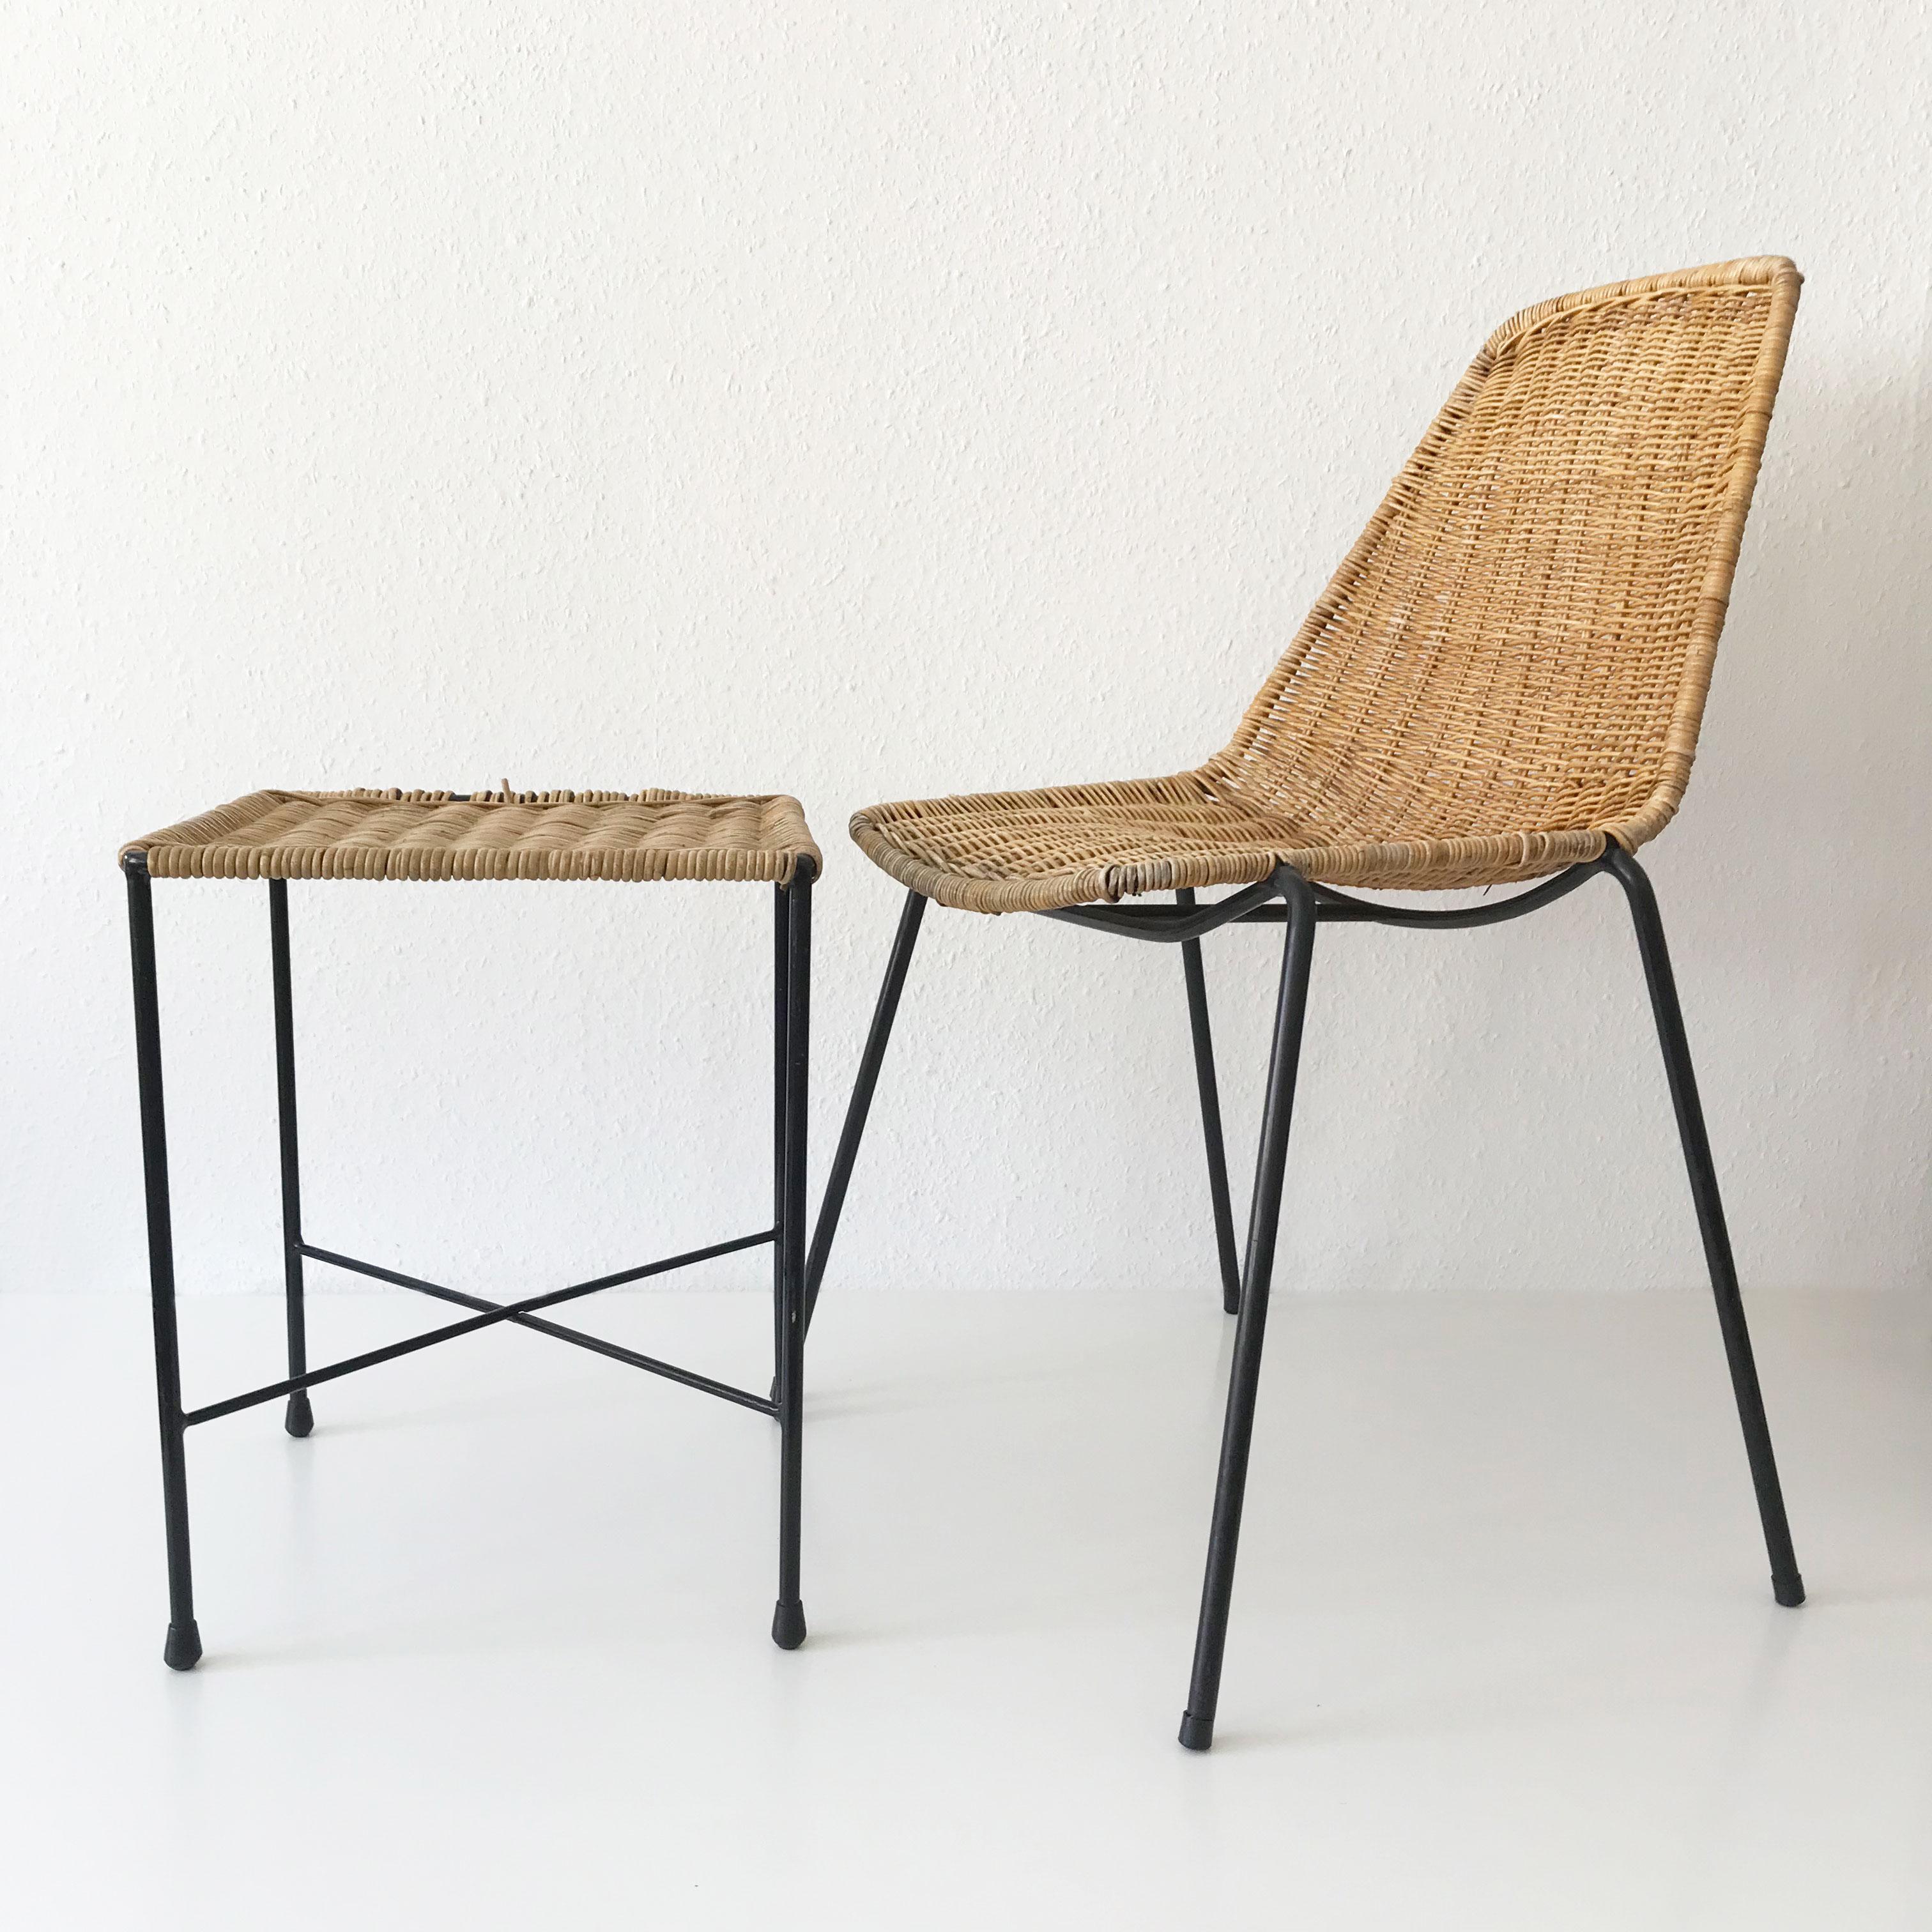 Set of Two Basket Chairs and Stool by Gian Franco Legler, 1951, Switzerland 2